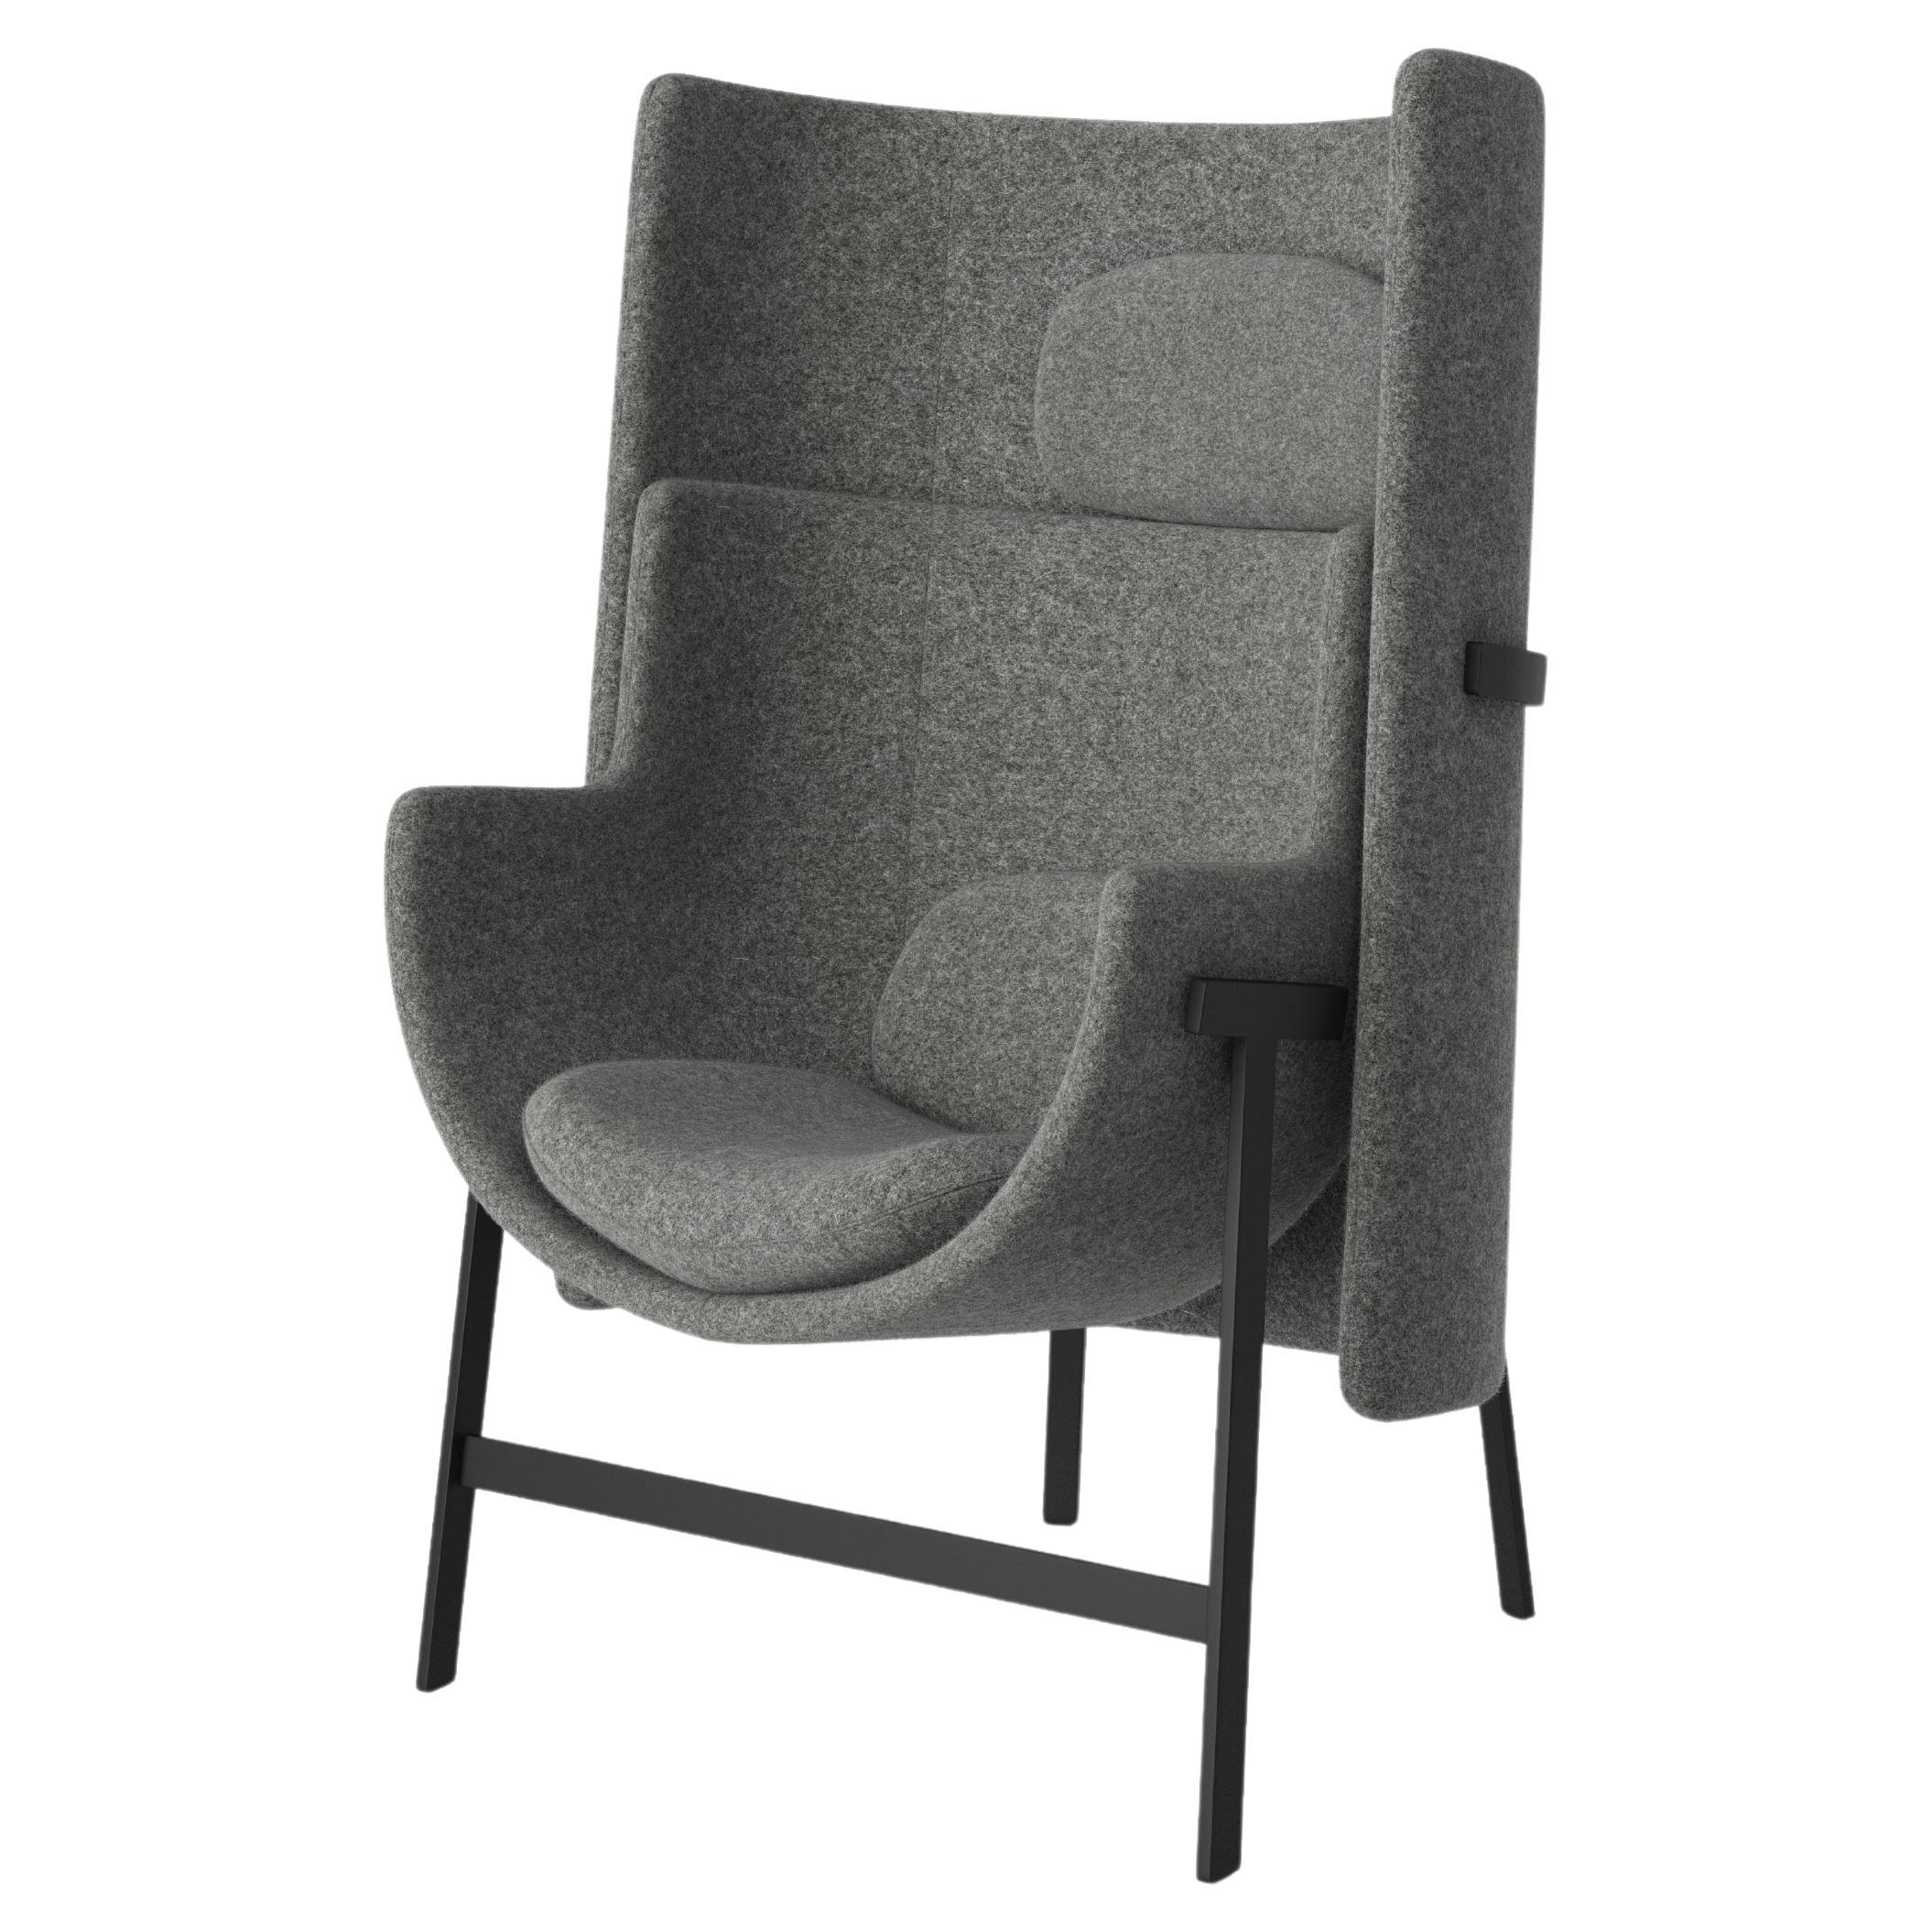 Upholstered Grey Fabric And Steel Deep Highback Chair, Kite For Sale